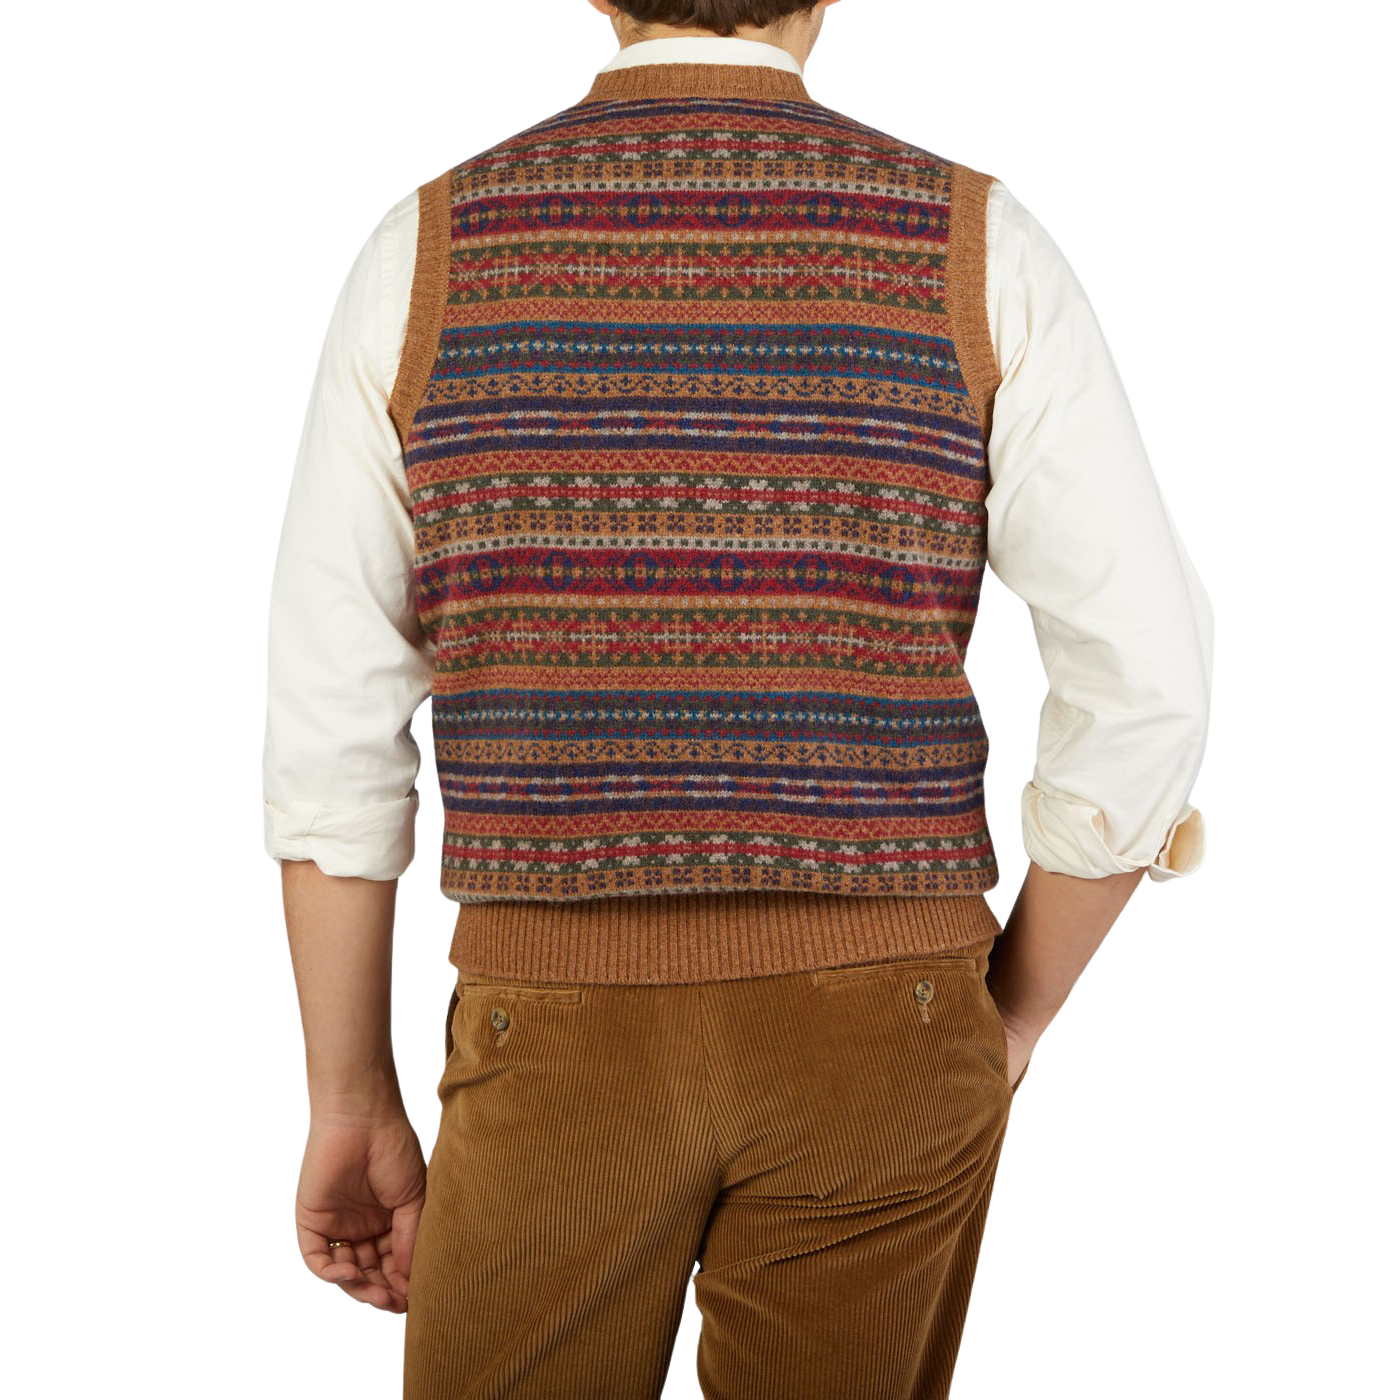 A man wearing a William Lockie Light Brown Fair Isle V-Neck Lambswool Slipover with a multi colored Scottish lambswool pattern.